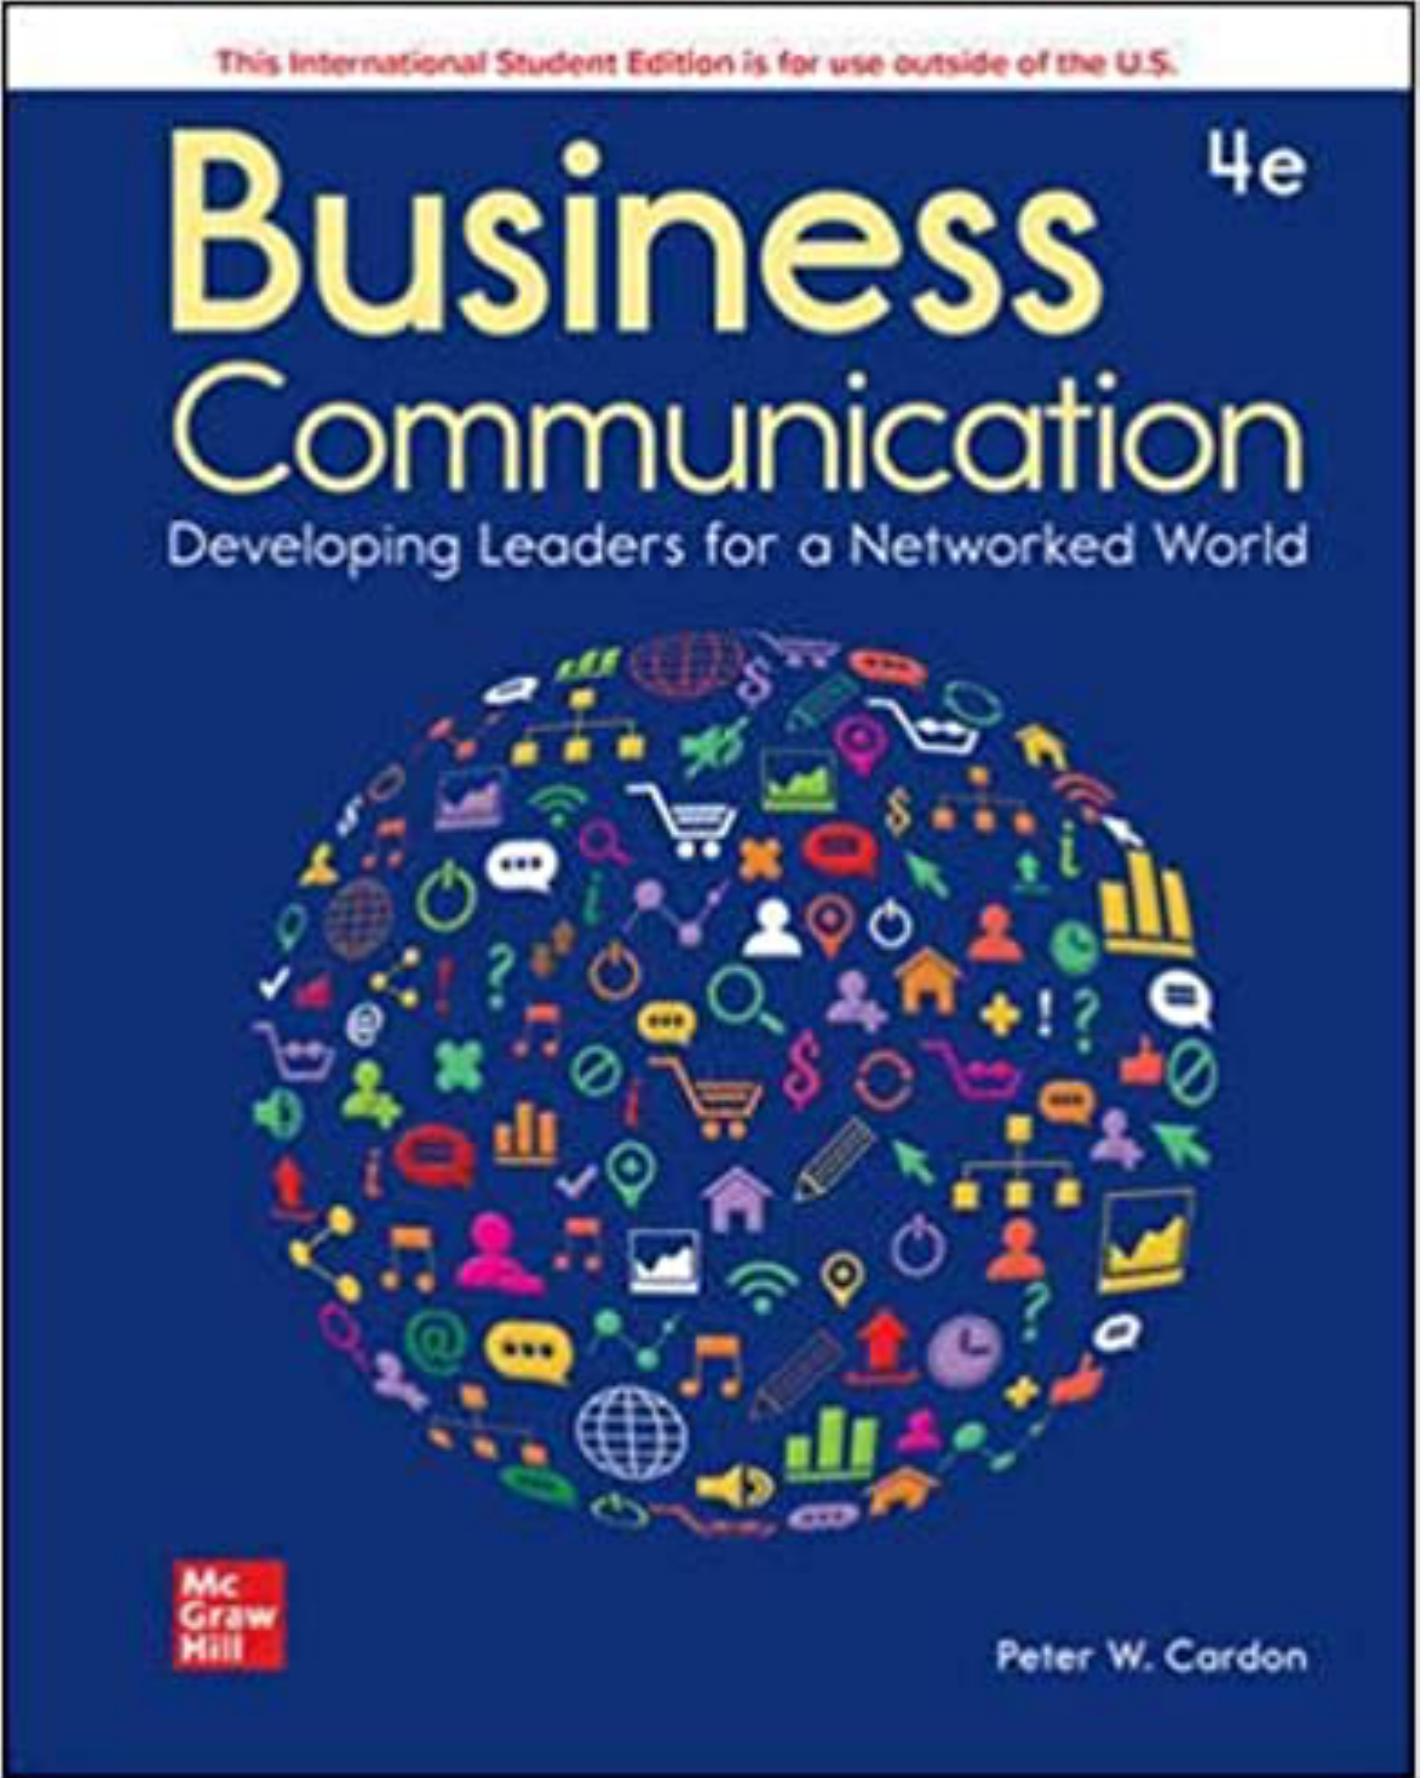 (eBook PDF)Business Communication: Developing Leaders for a Networked World 4th Edition by Peter Cardon